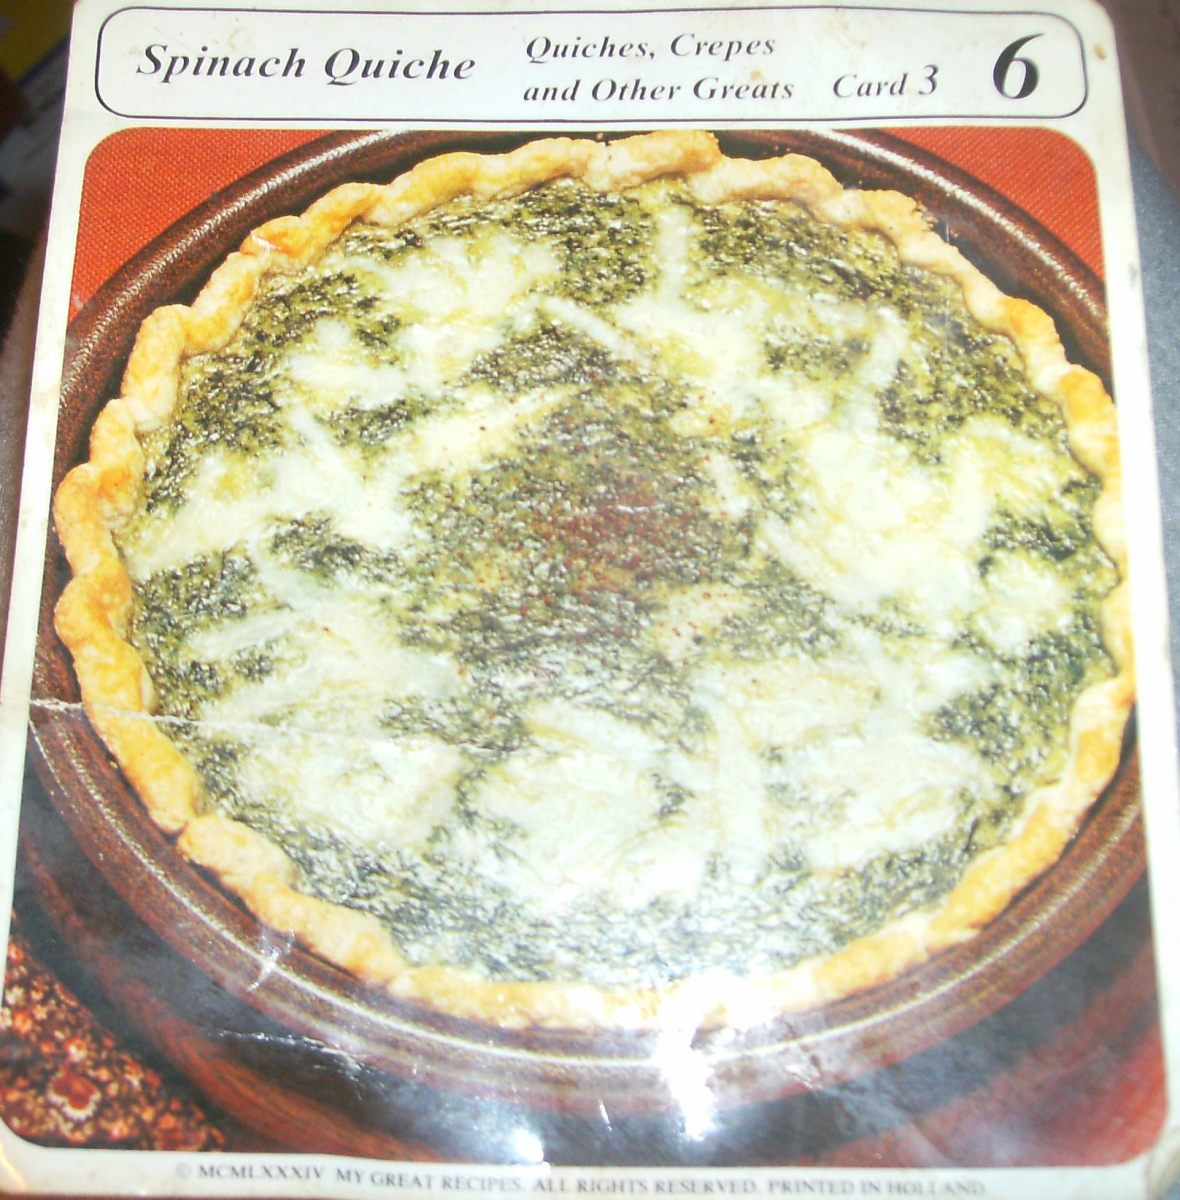 Easy Spinach Quiche with Swiss Cheese Recipe